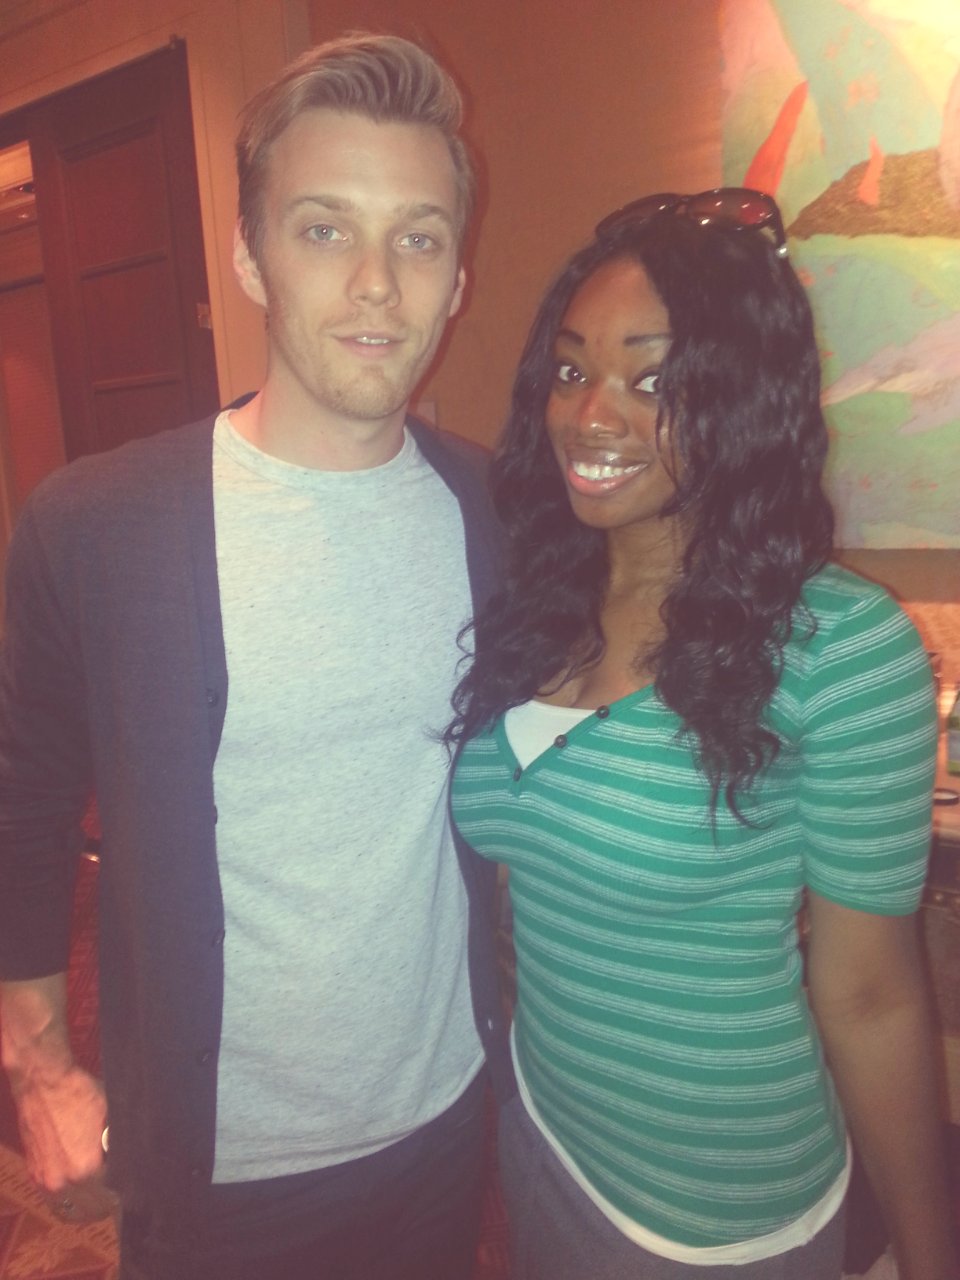 MovieSoS.net host Omaka Omegah with Jake Abel, star of The Host